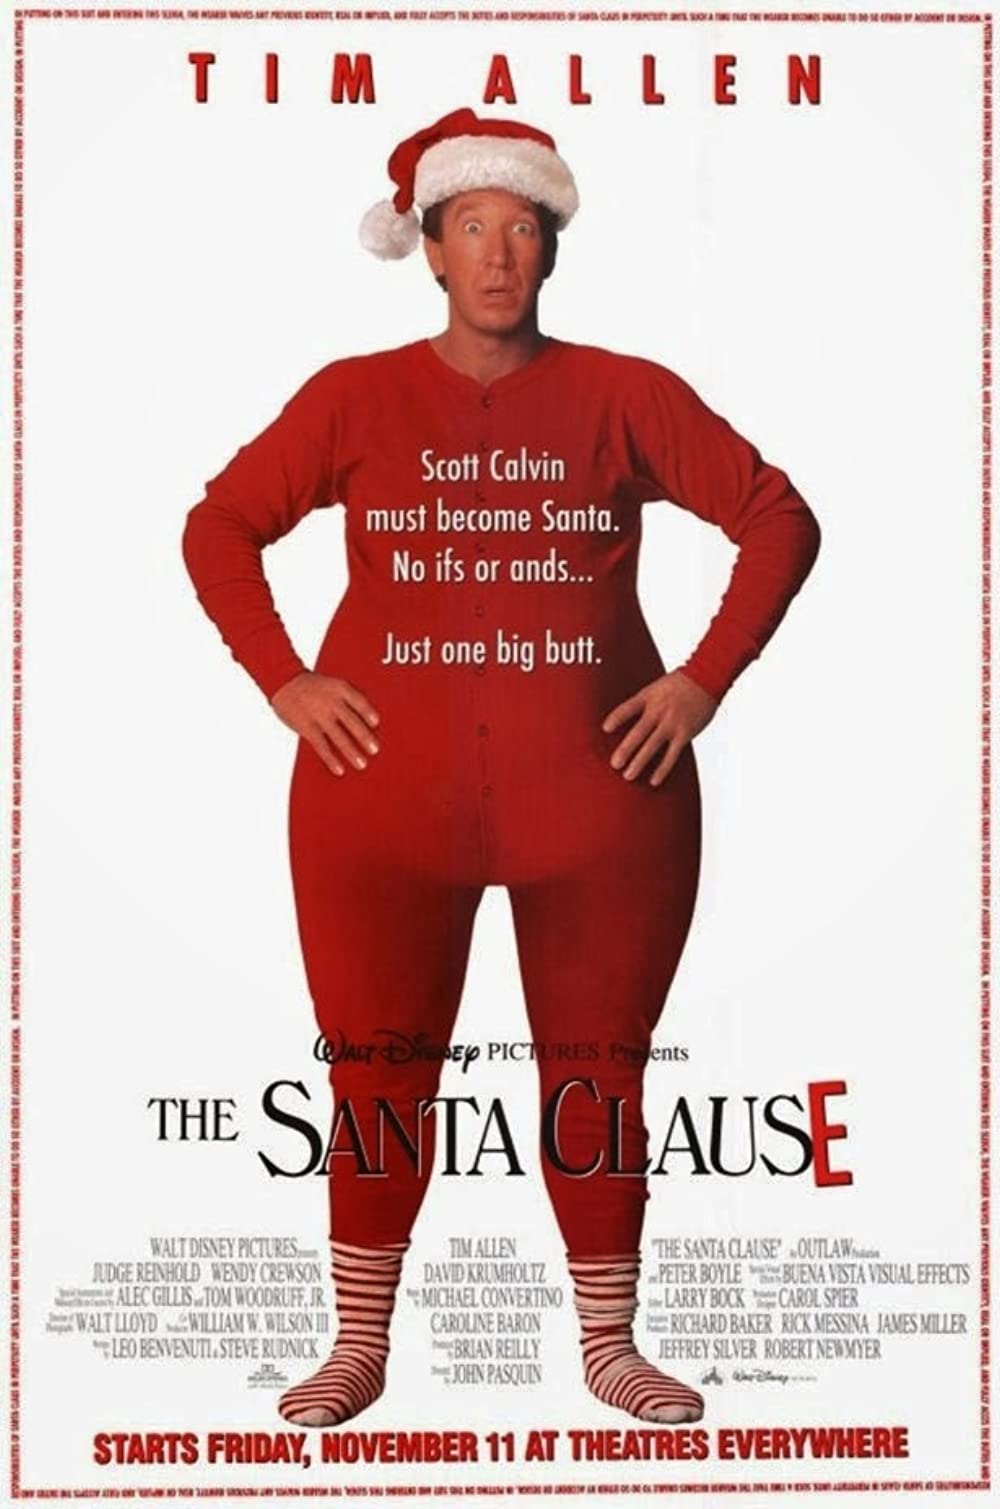 The Santa Clause Film Poster